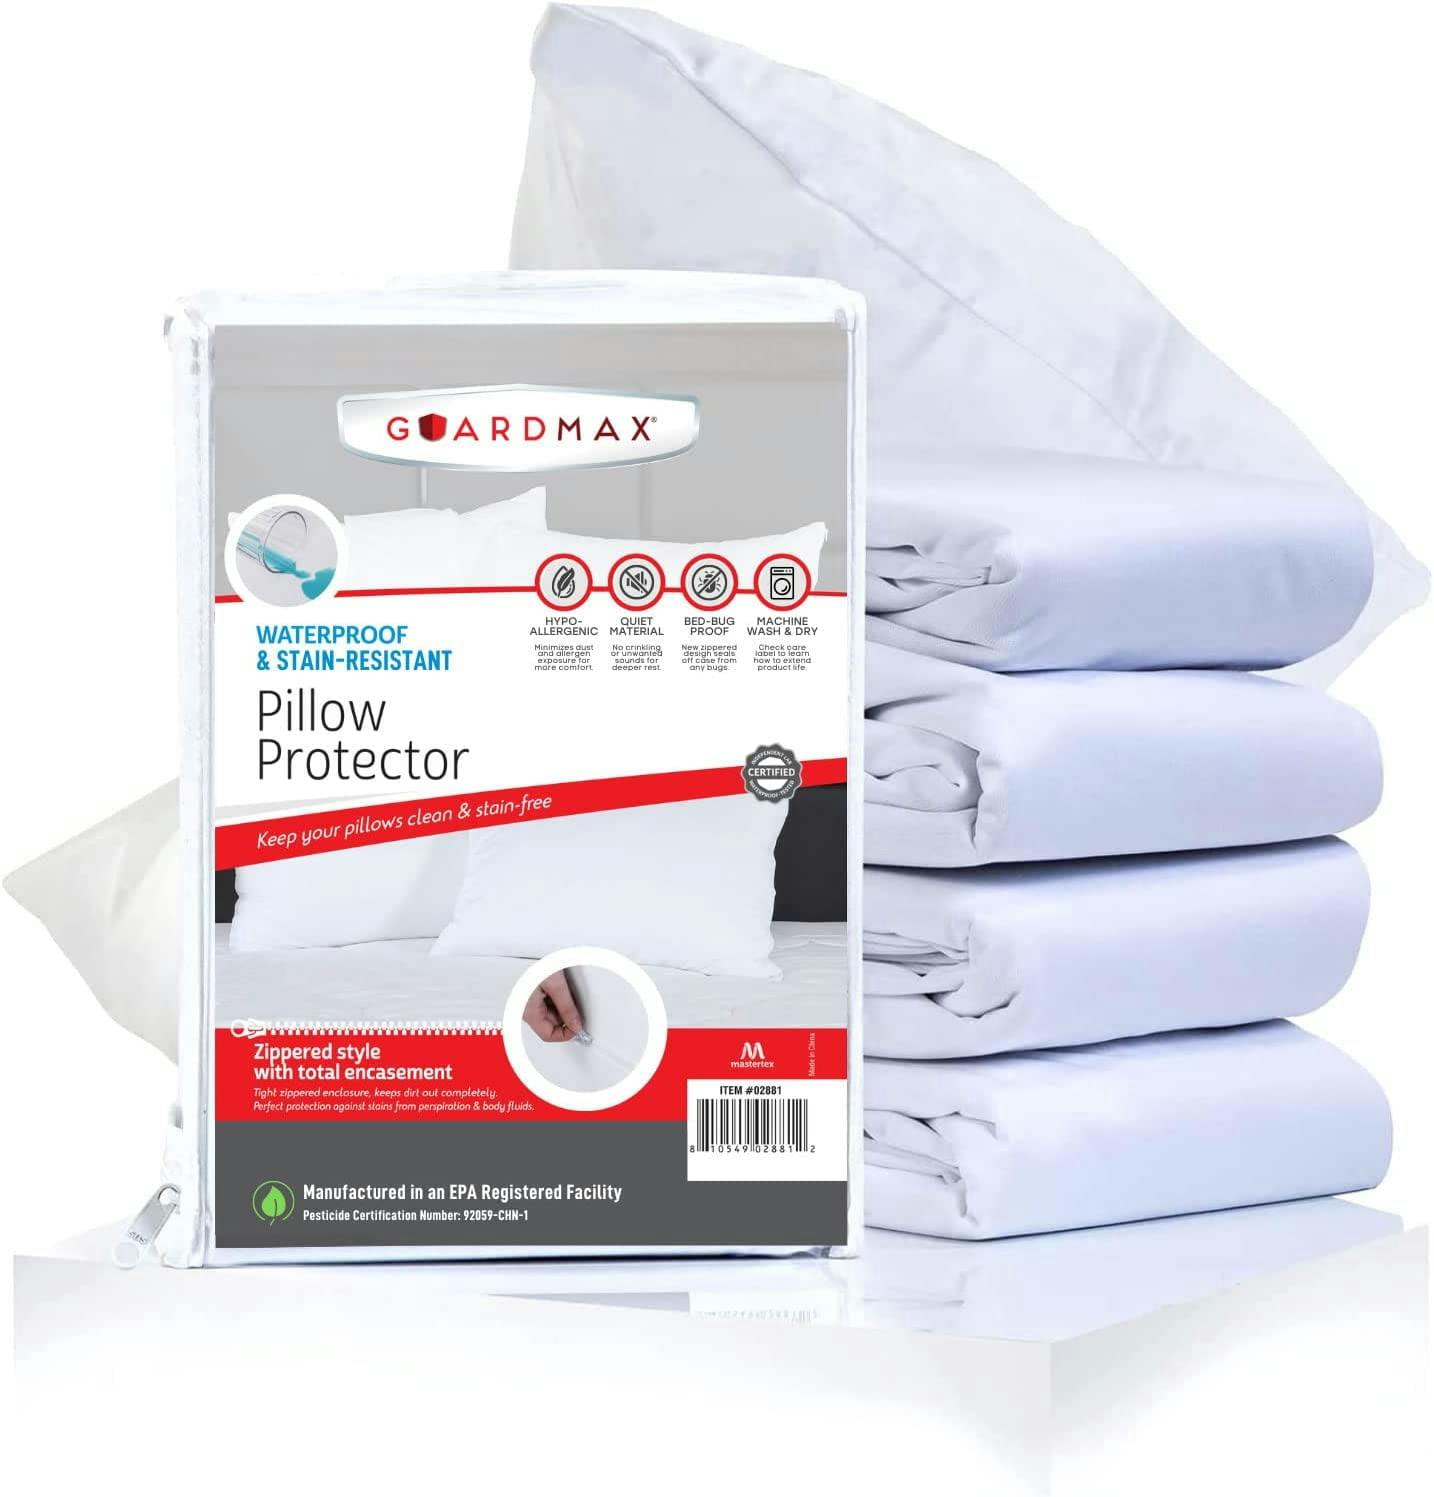 Hypoallergenic Queen-Size Polyester Pillow Protector 6-Pack with Zipper